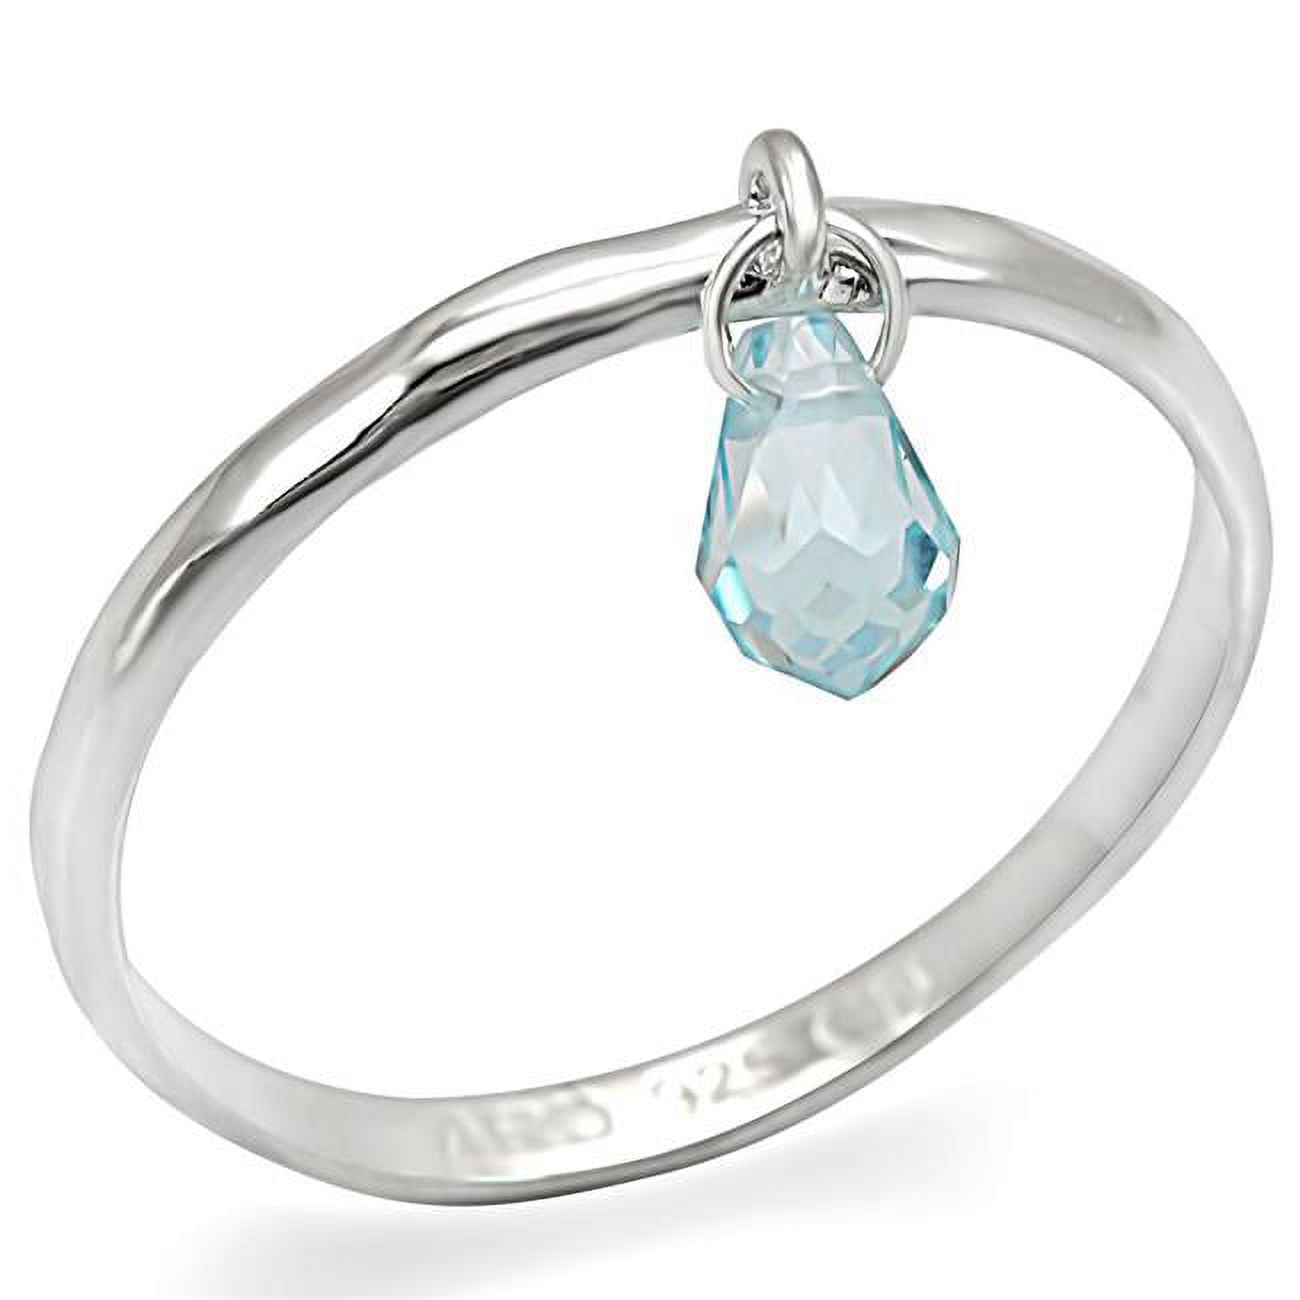 Picture of Alamode LOS268-6 Women Silver 925 Sterling Silver Ring with Genuine Stone in Sea Blue - Size 6